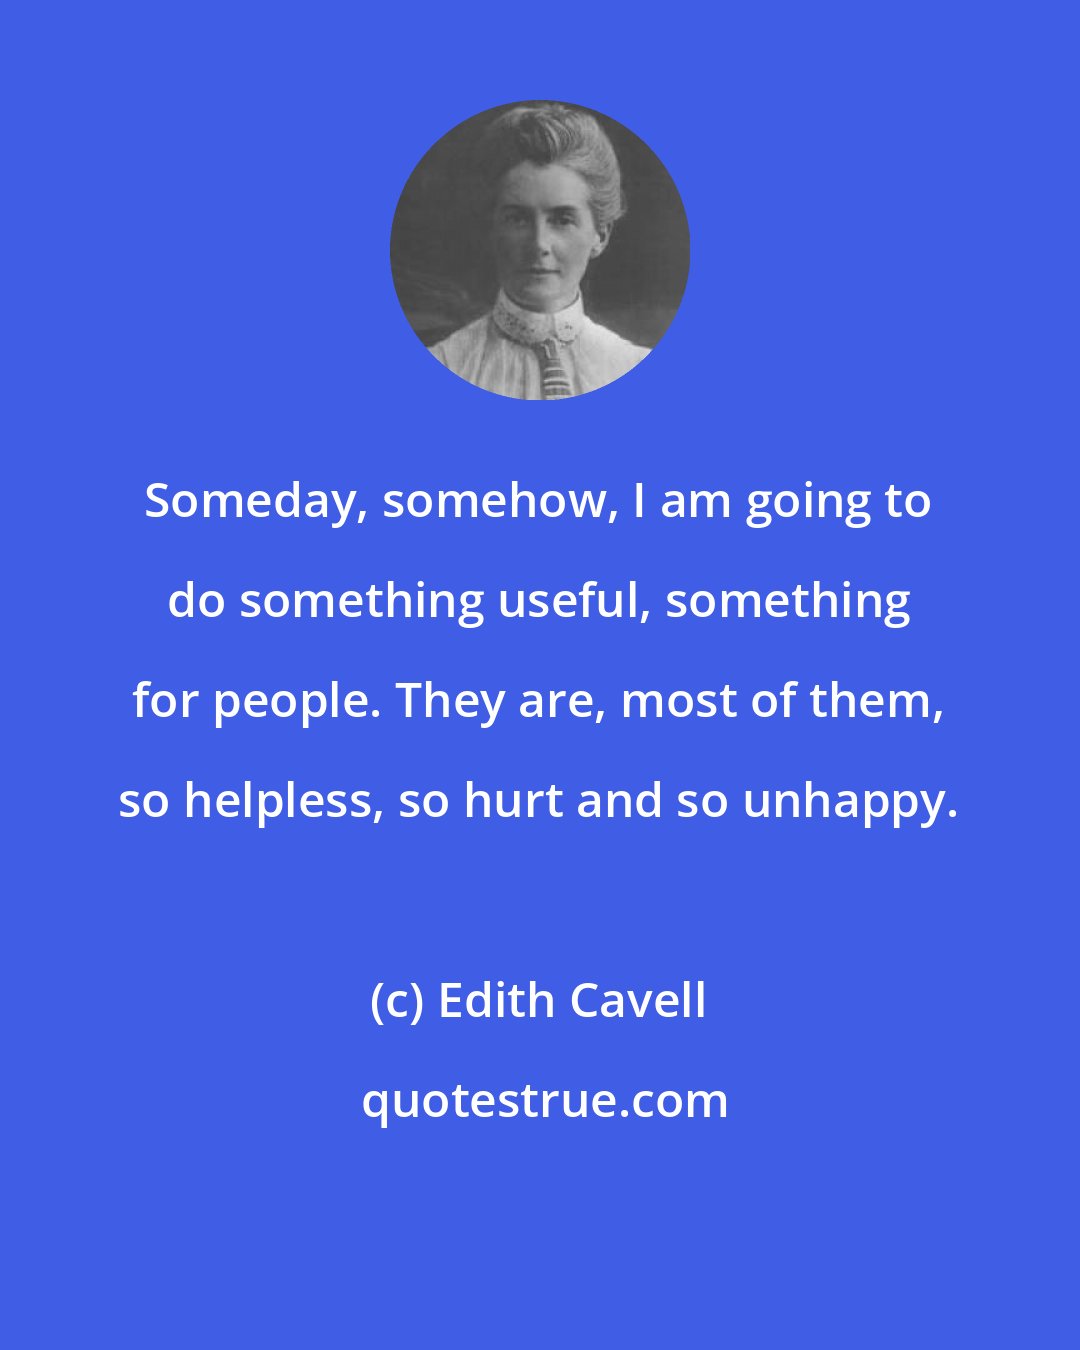 Edith Cavell: Someday, somehow, I am going to do something useful, something for people. They are, most of them, so helpless, so hurt and so unhappy.